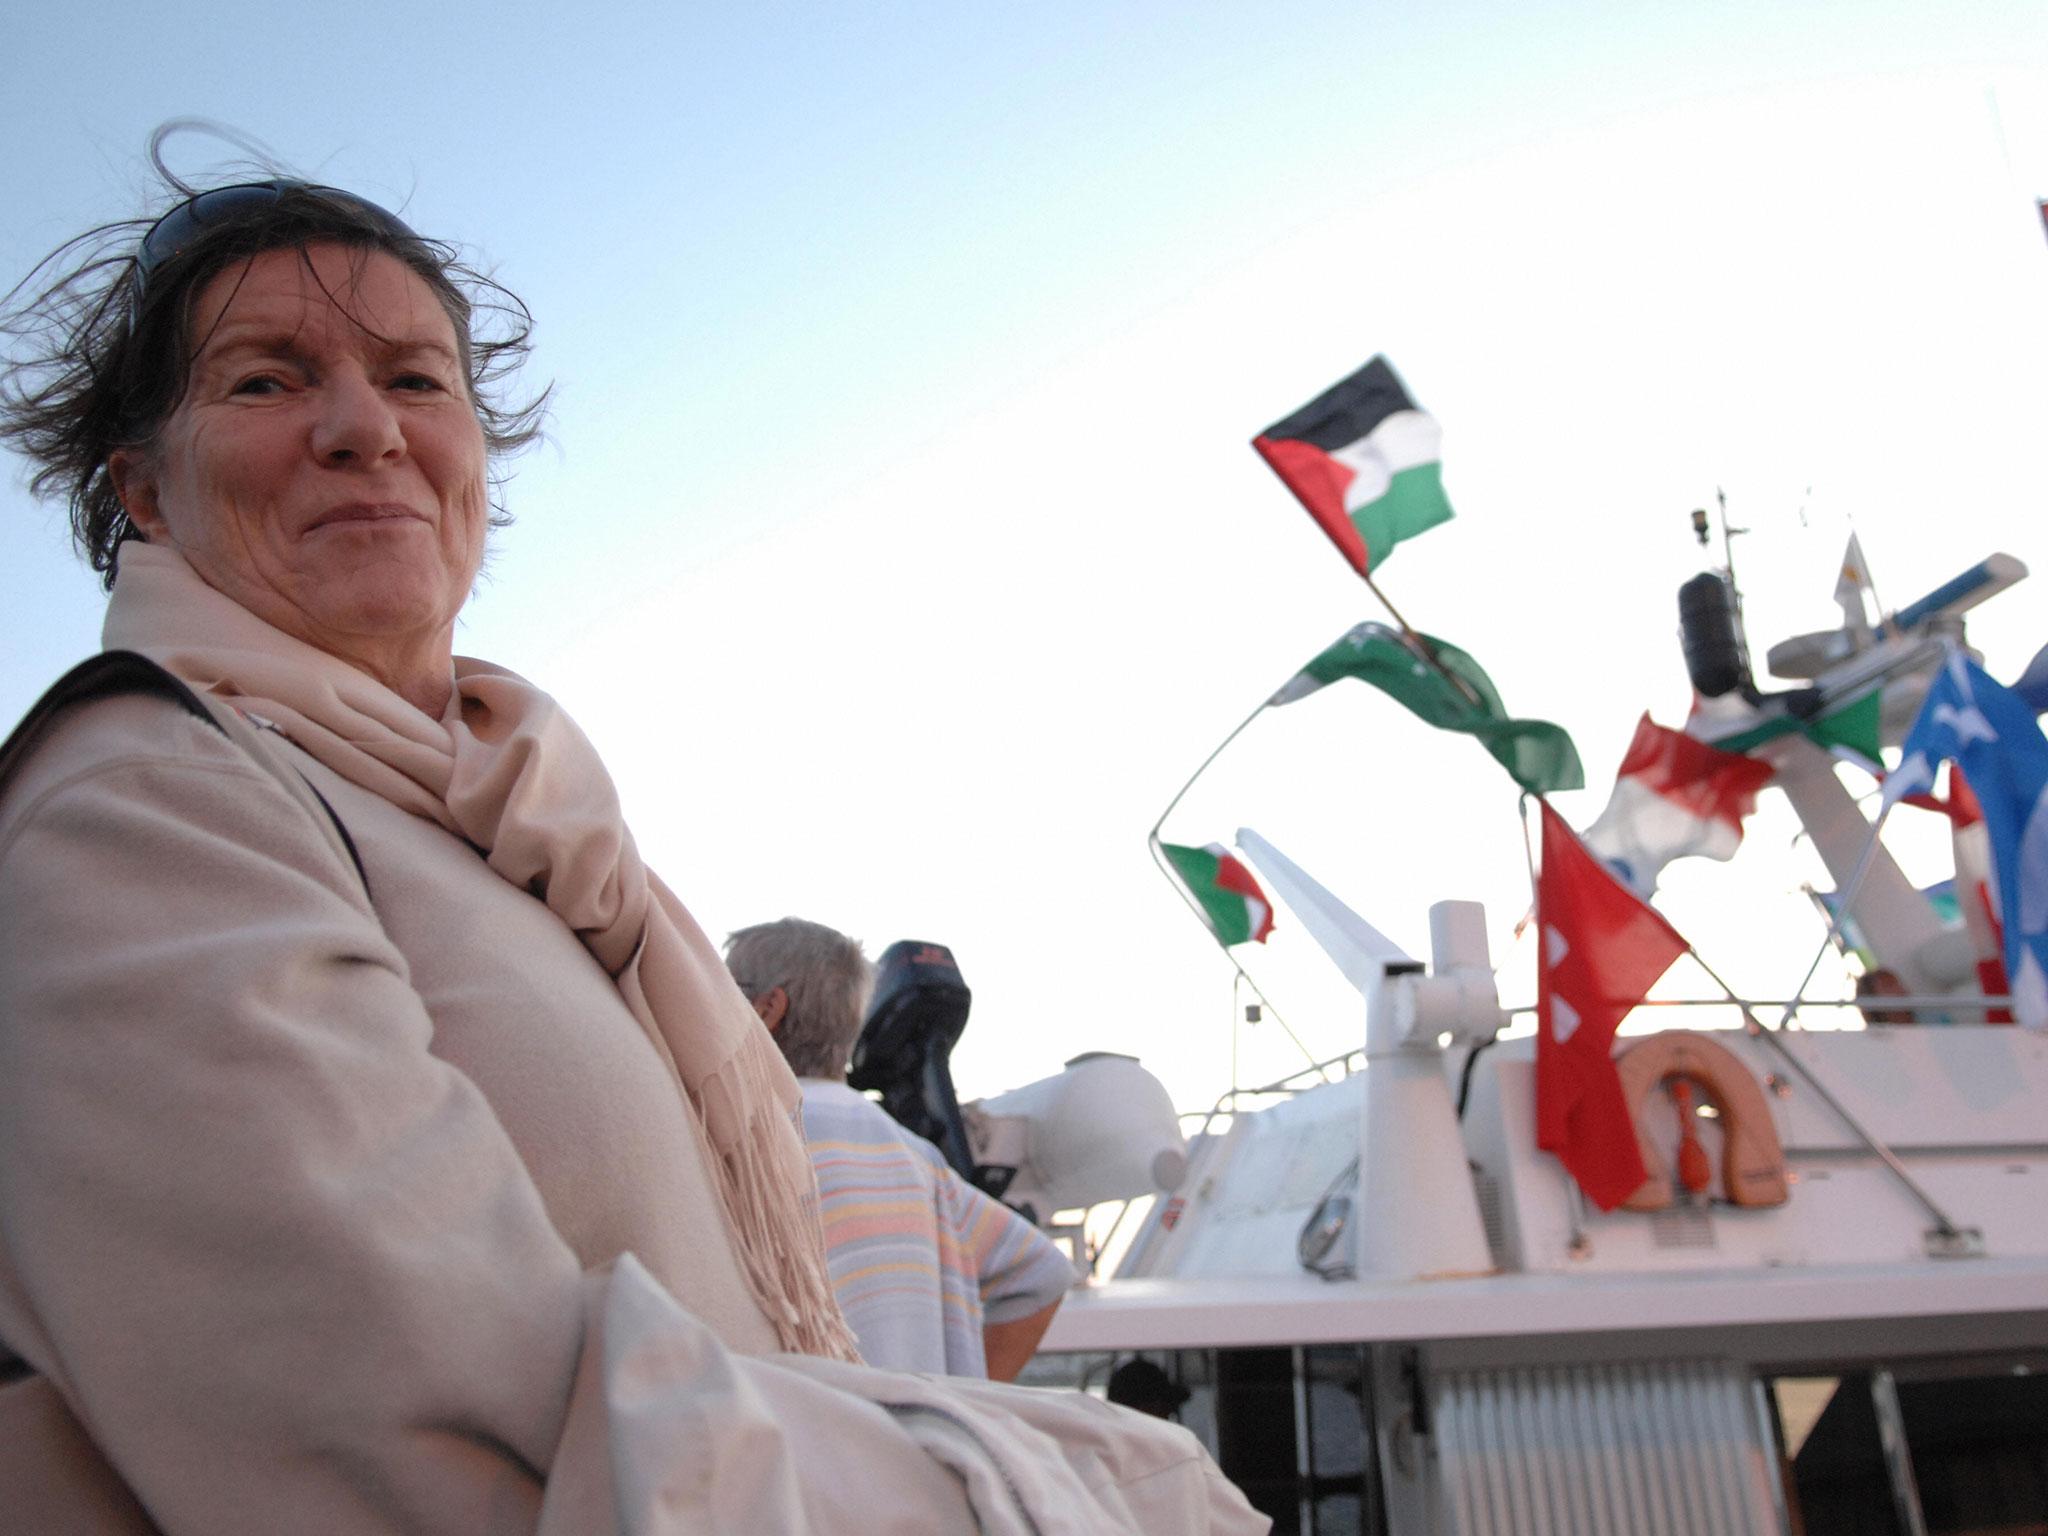 ormer member of the British parliament Baroness Jeniffer Tonge stands in front of the boat 'Dignity' as he gets ready along with other peace activists and European politicians to sail out from the southern Cypriot port of Larnaca to the Gaza Strip on 7 November, 2008